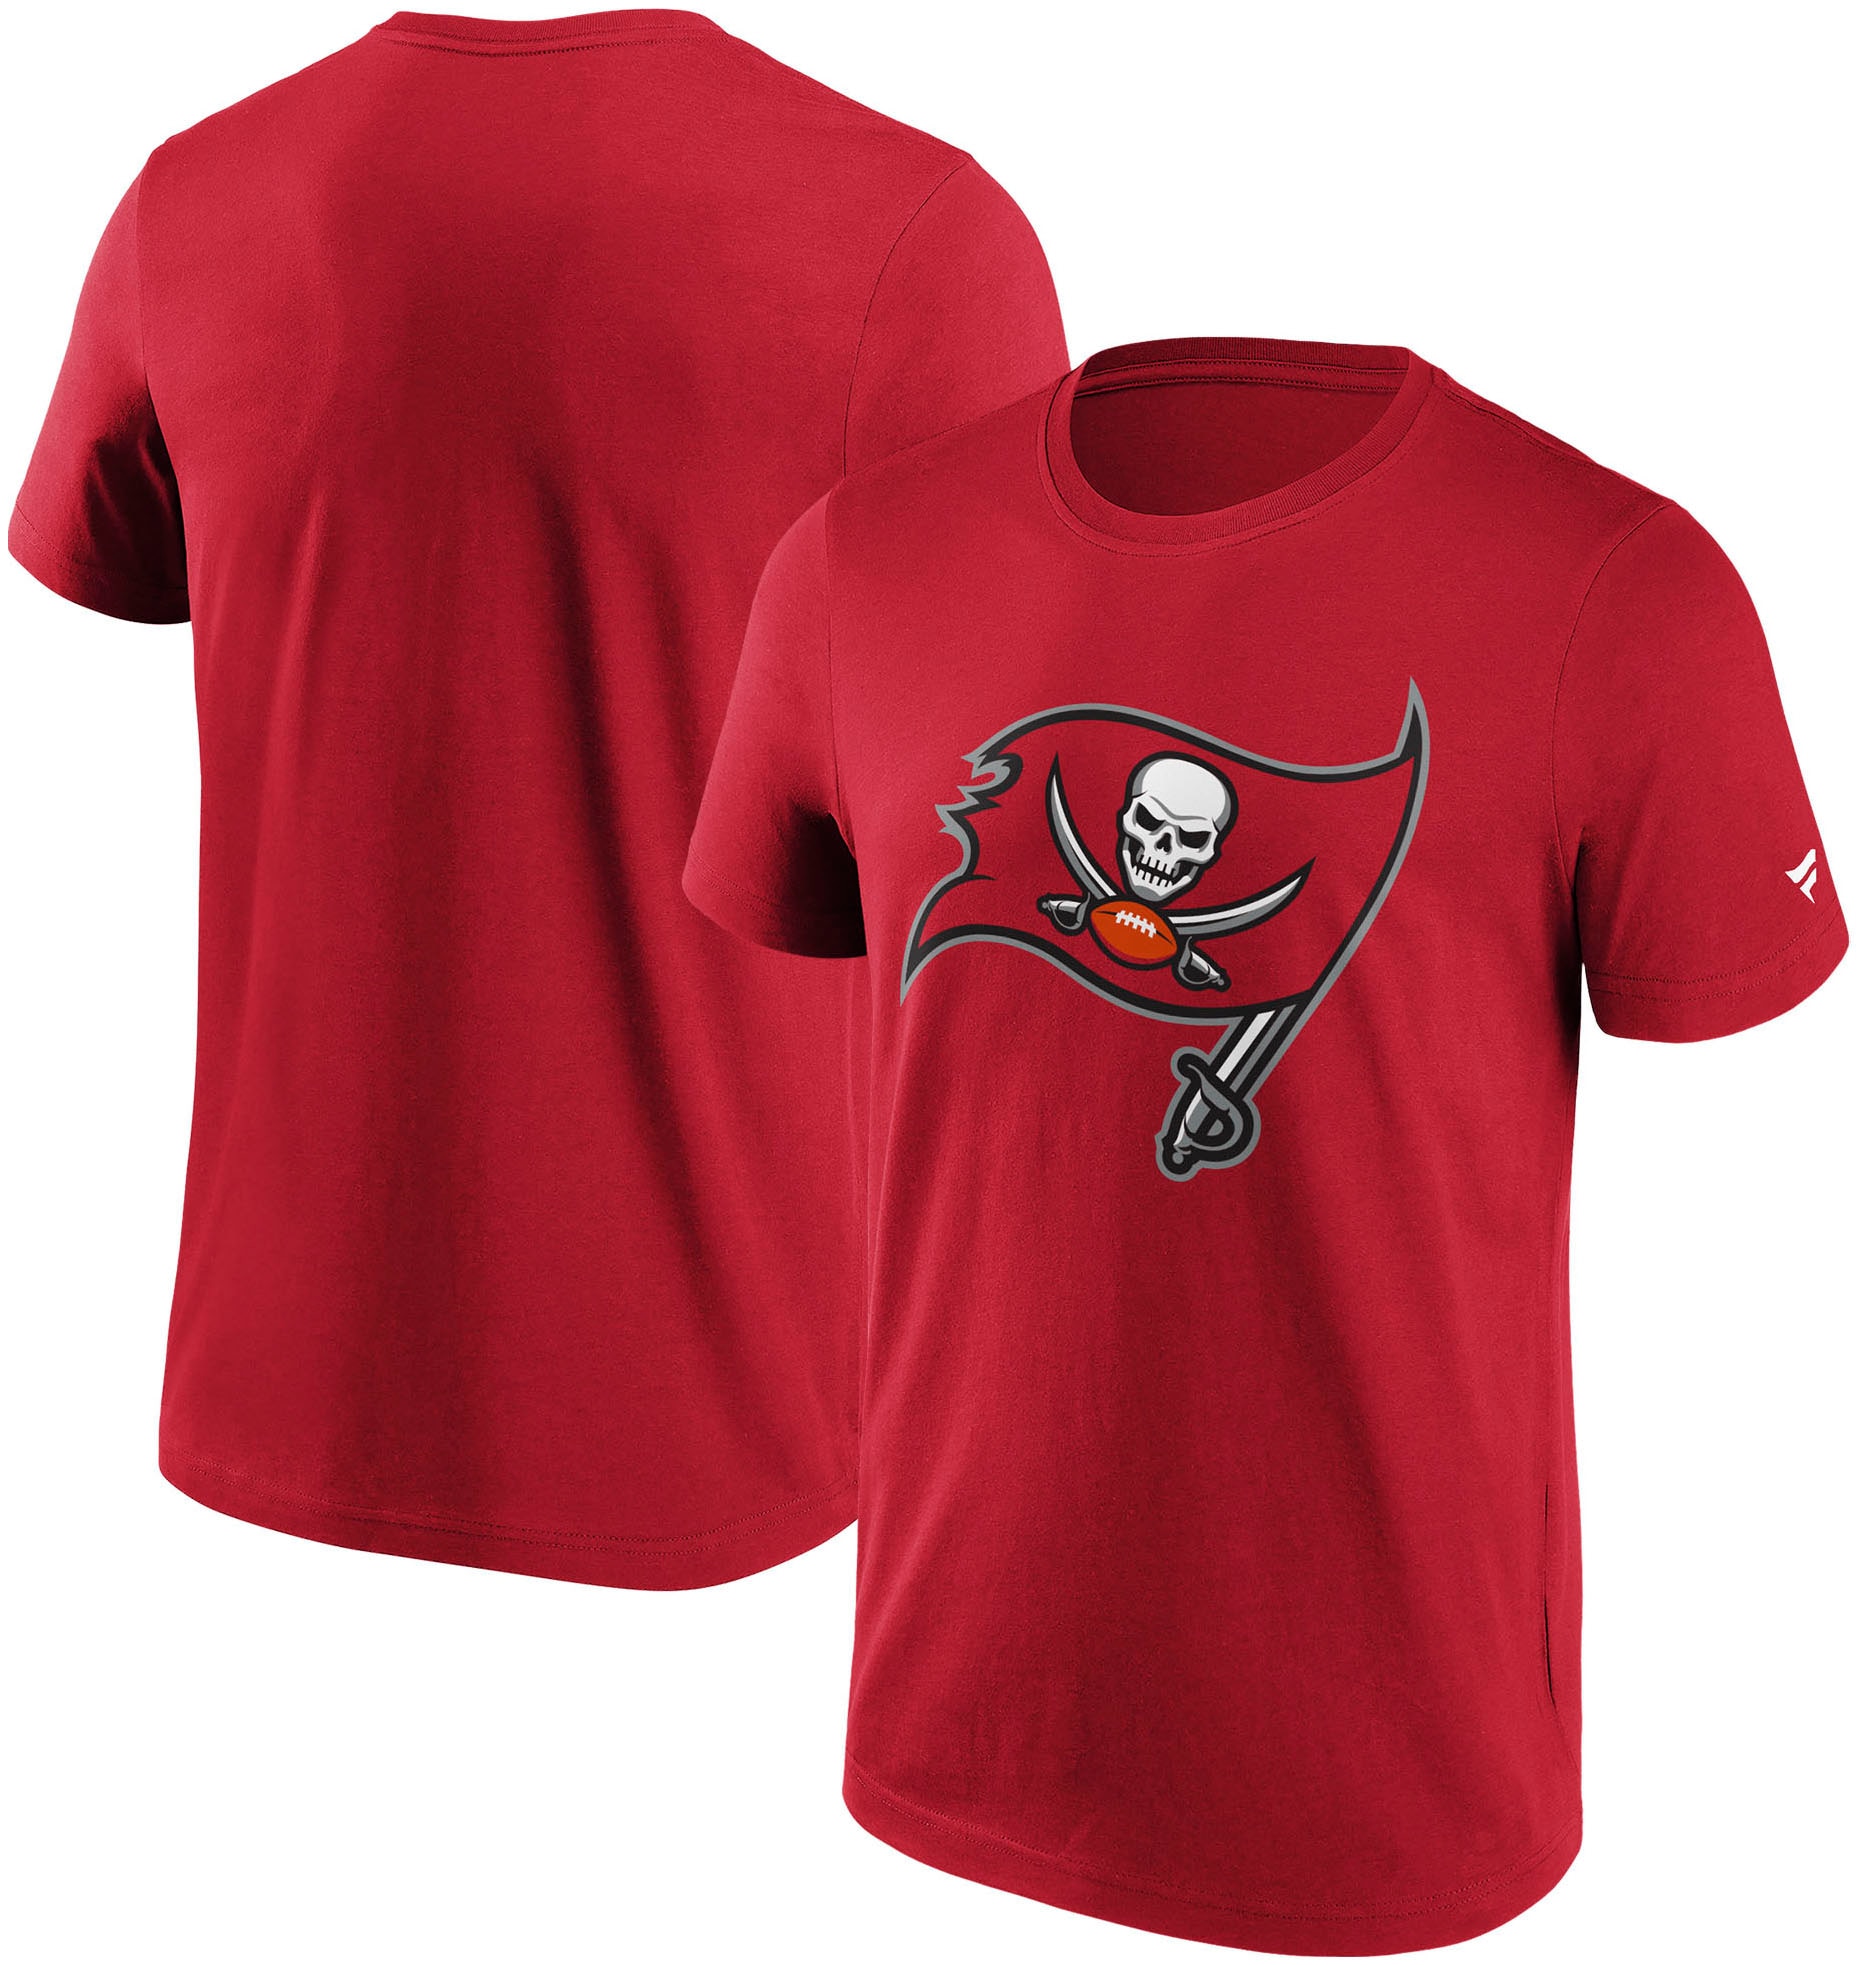 T-Shirt »TAMPA BAY BUCCANEERS PRIMARY LOGO GRAPHIC T-SHIRT NFL«